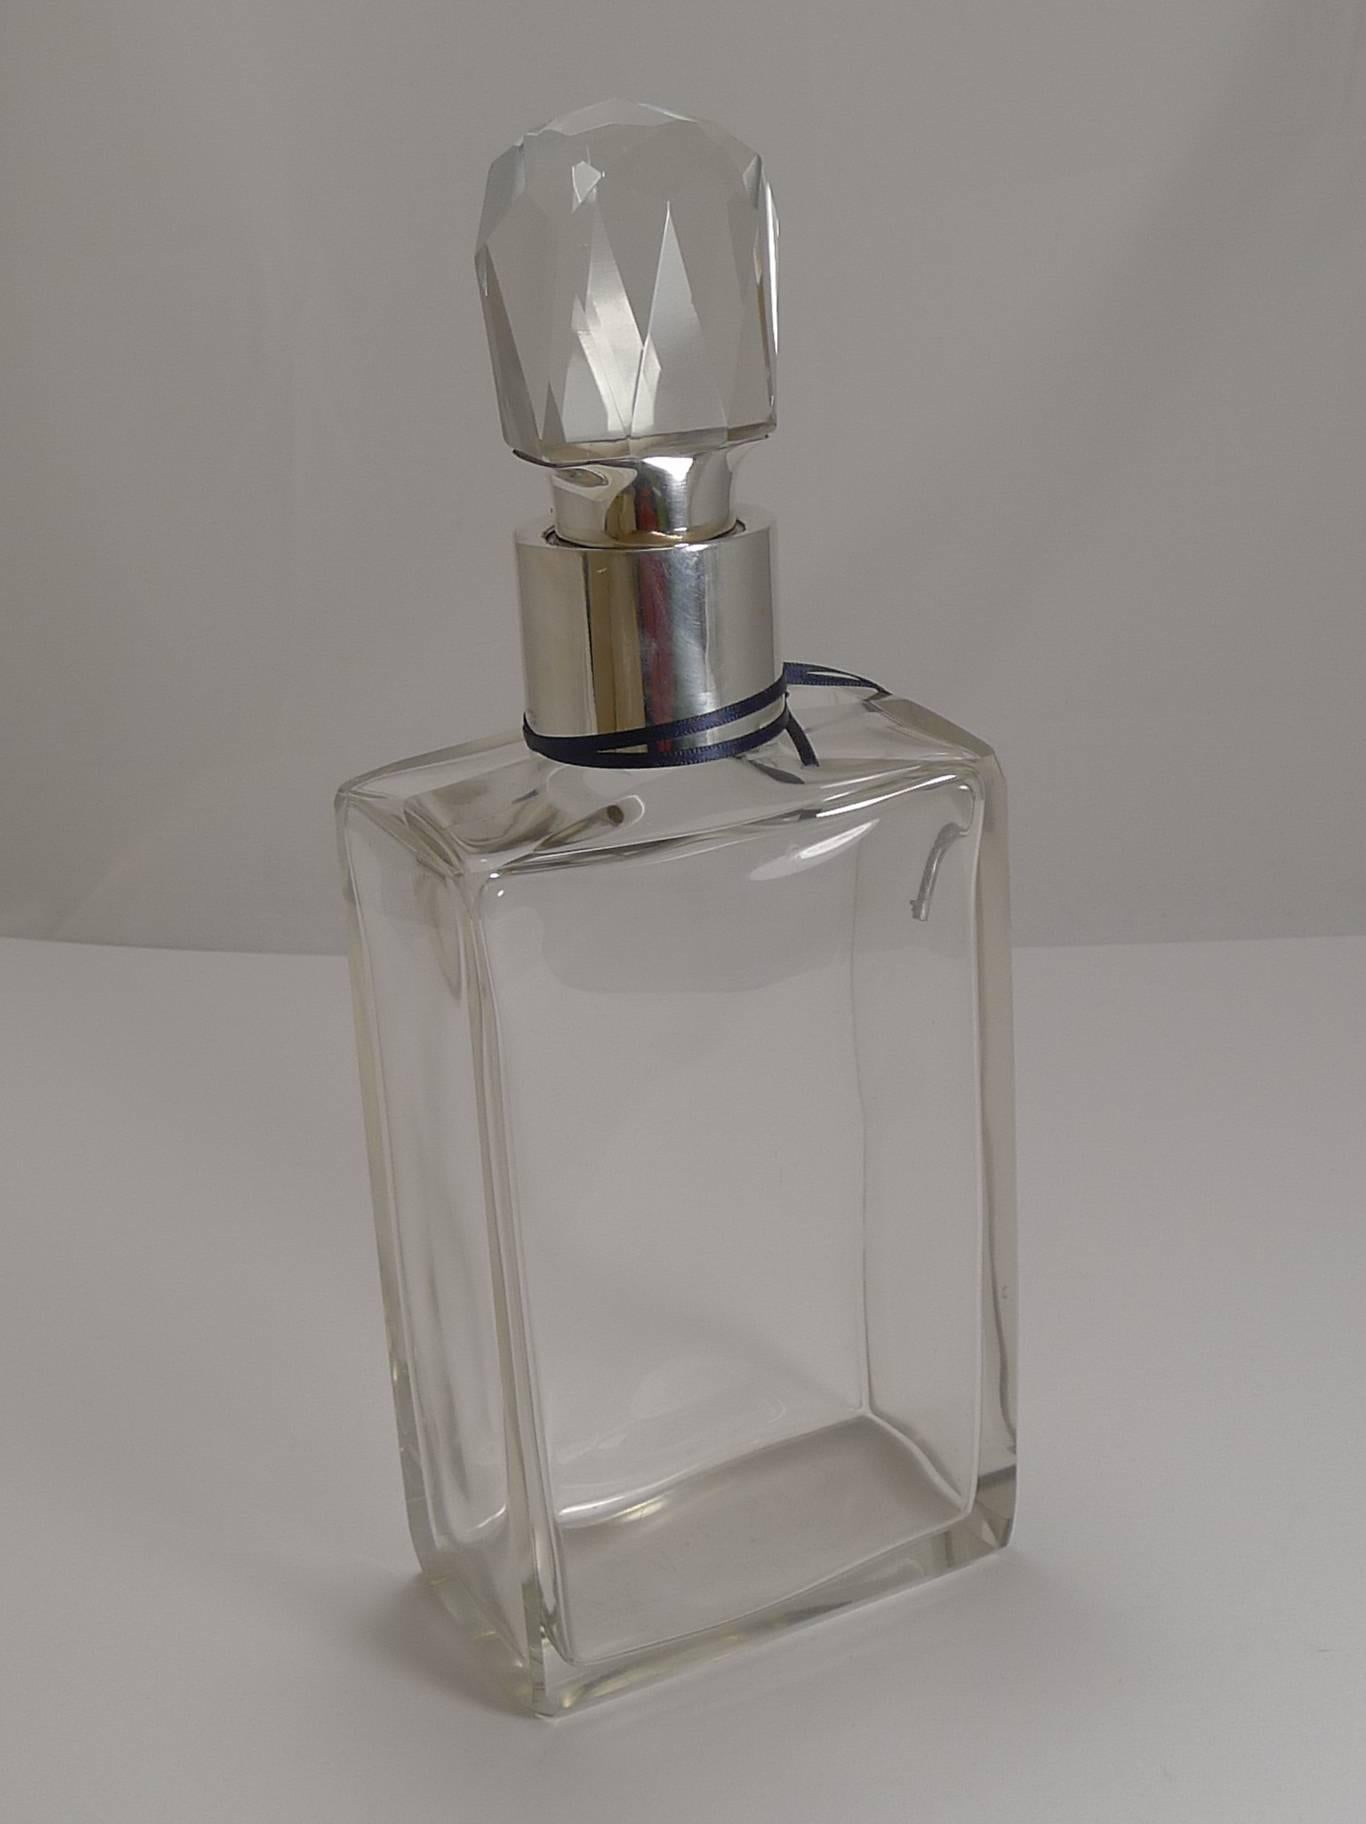 English Large Art Deco Sterling Silver Lockable Decanter by Asprey, 1918